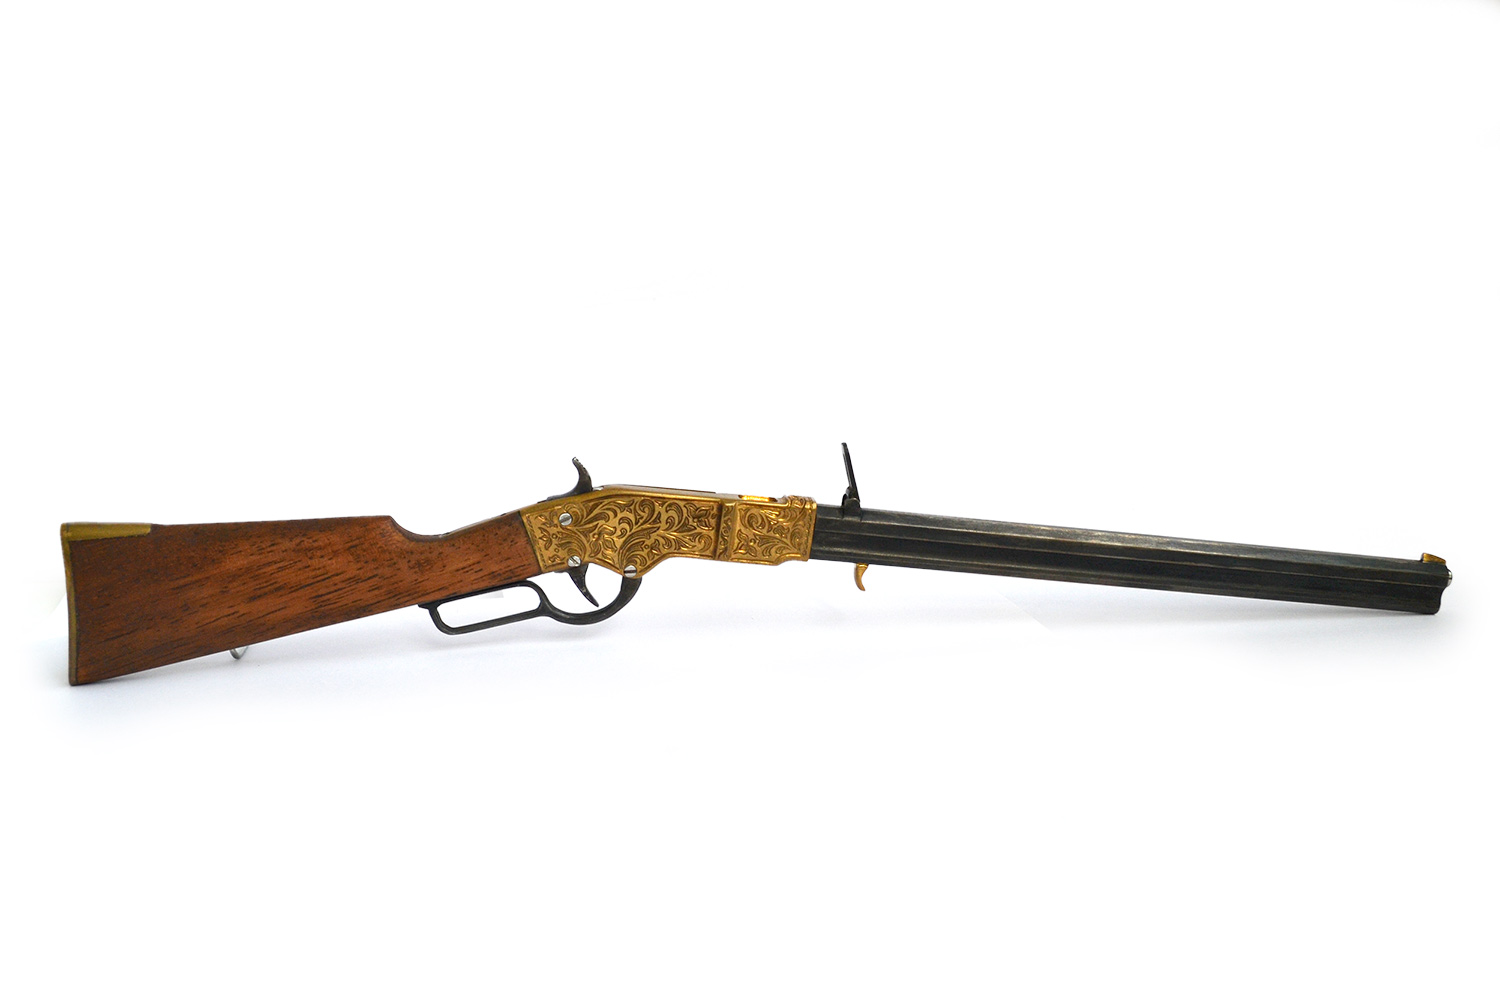 Model Henry 1860 rifle on a scale of 1:3